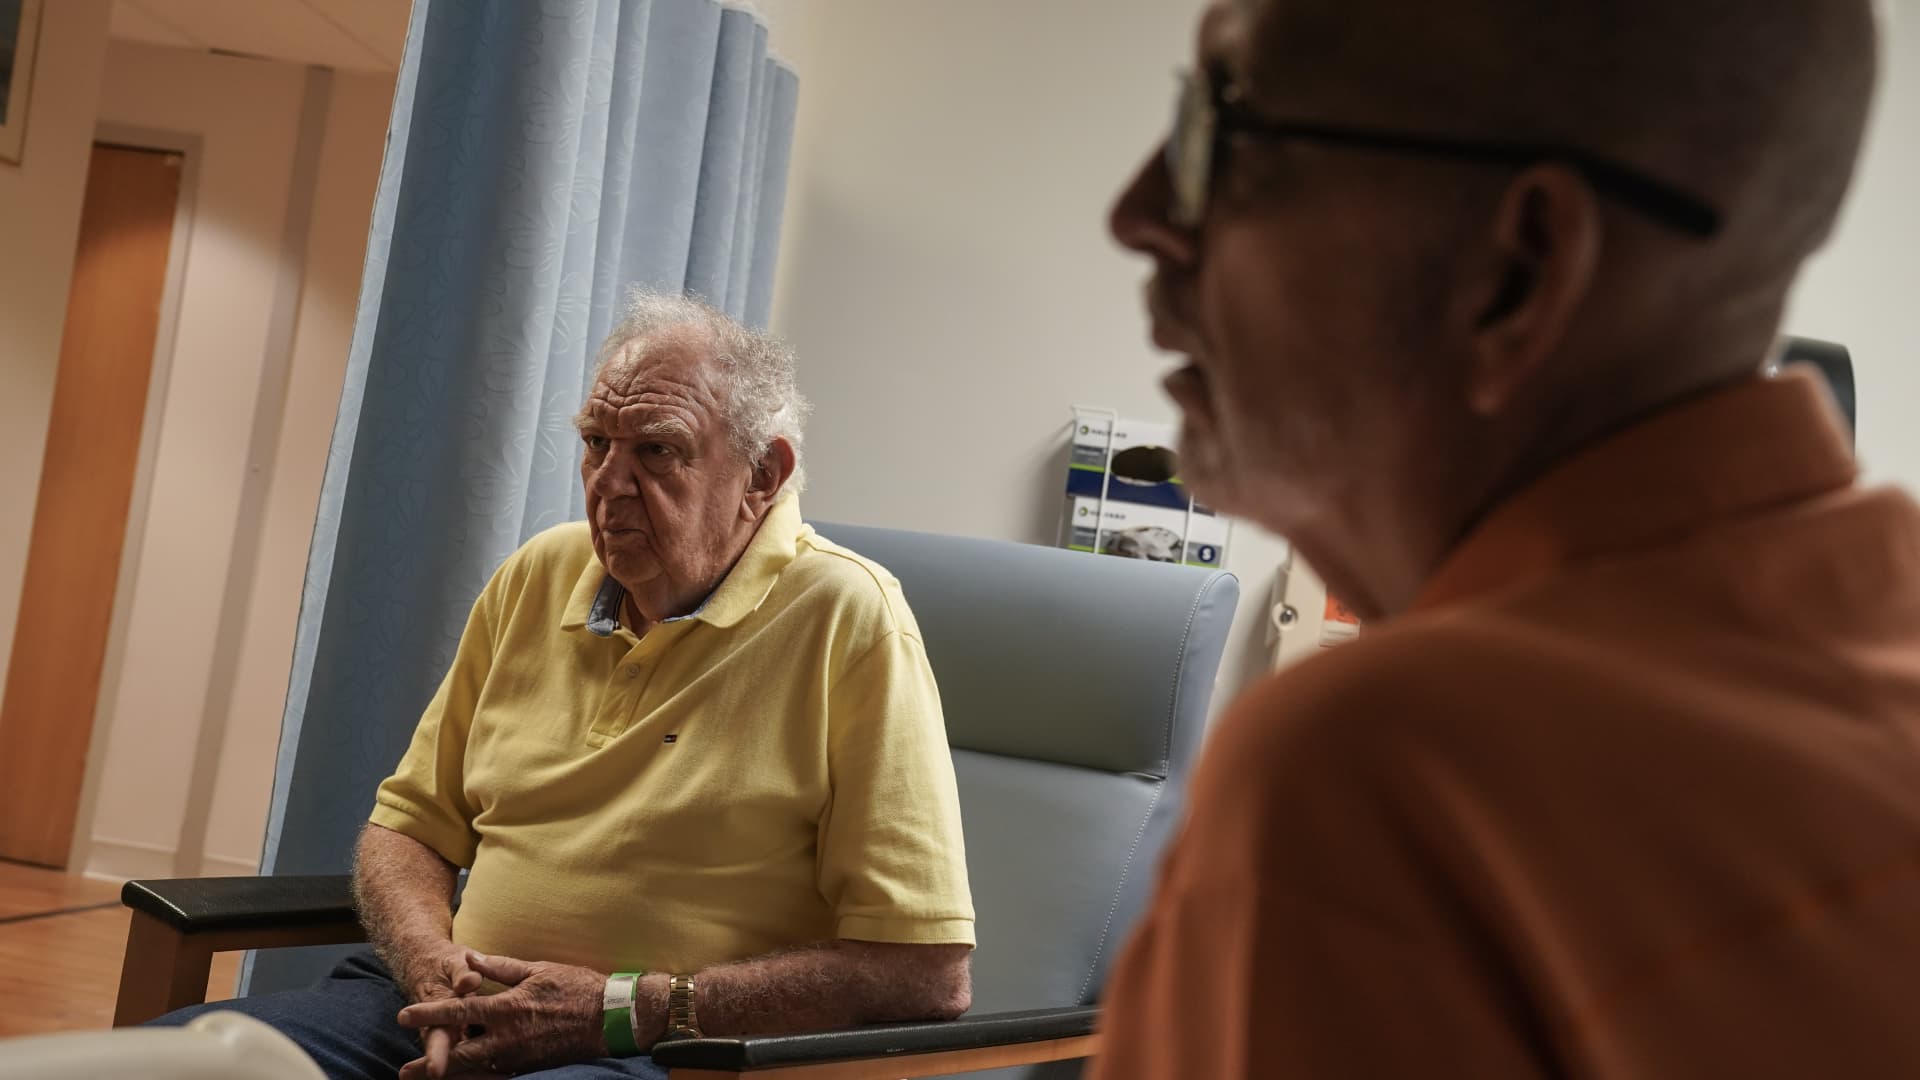 Jay Reinstein, right, who suffers from Alzheimer's, sits with his father, Max Reinstein, prior to receiving a PET scan that will determine whether he is eligible to take Leqembi, at MedStar Georgetown University Hospital in Washington, D.C., June 20, 2023.